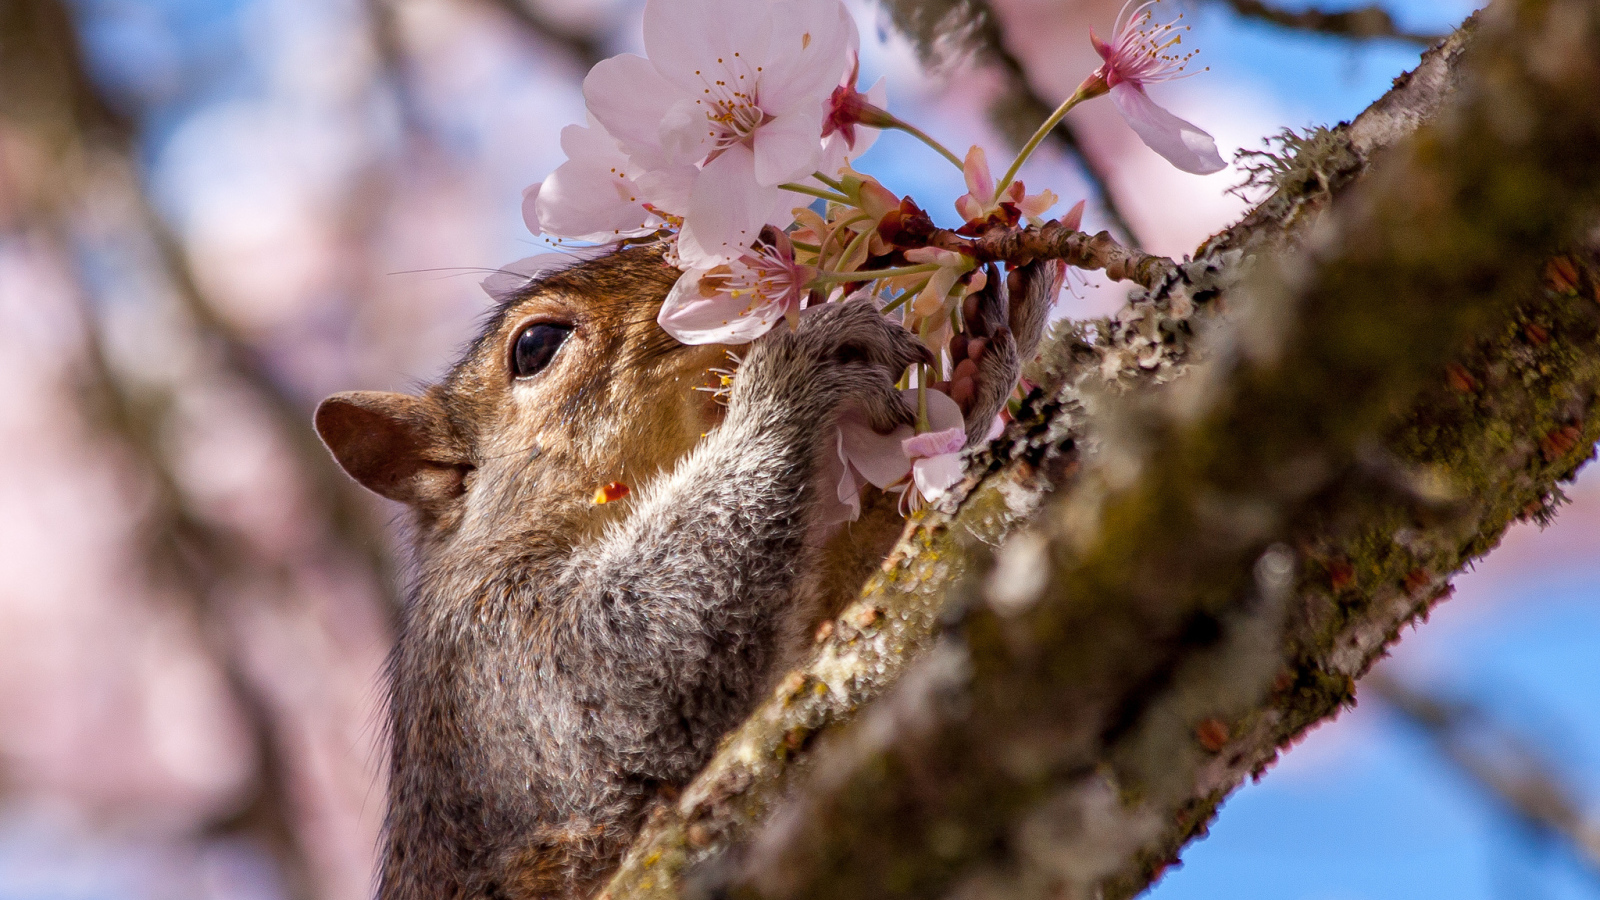 Squirrel sniffing a spring flower on a tree